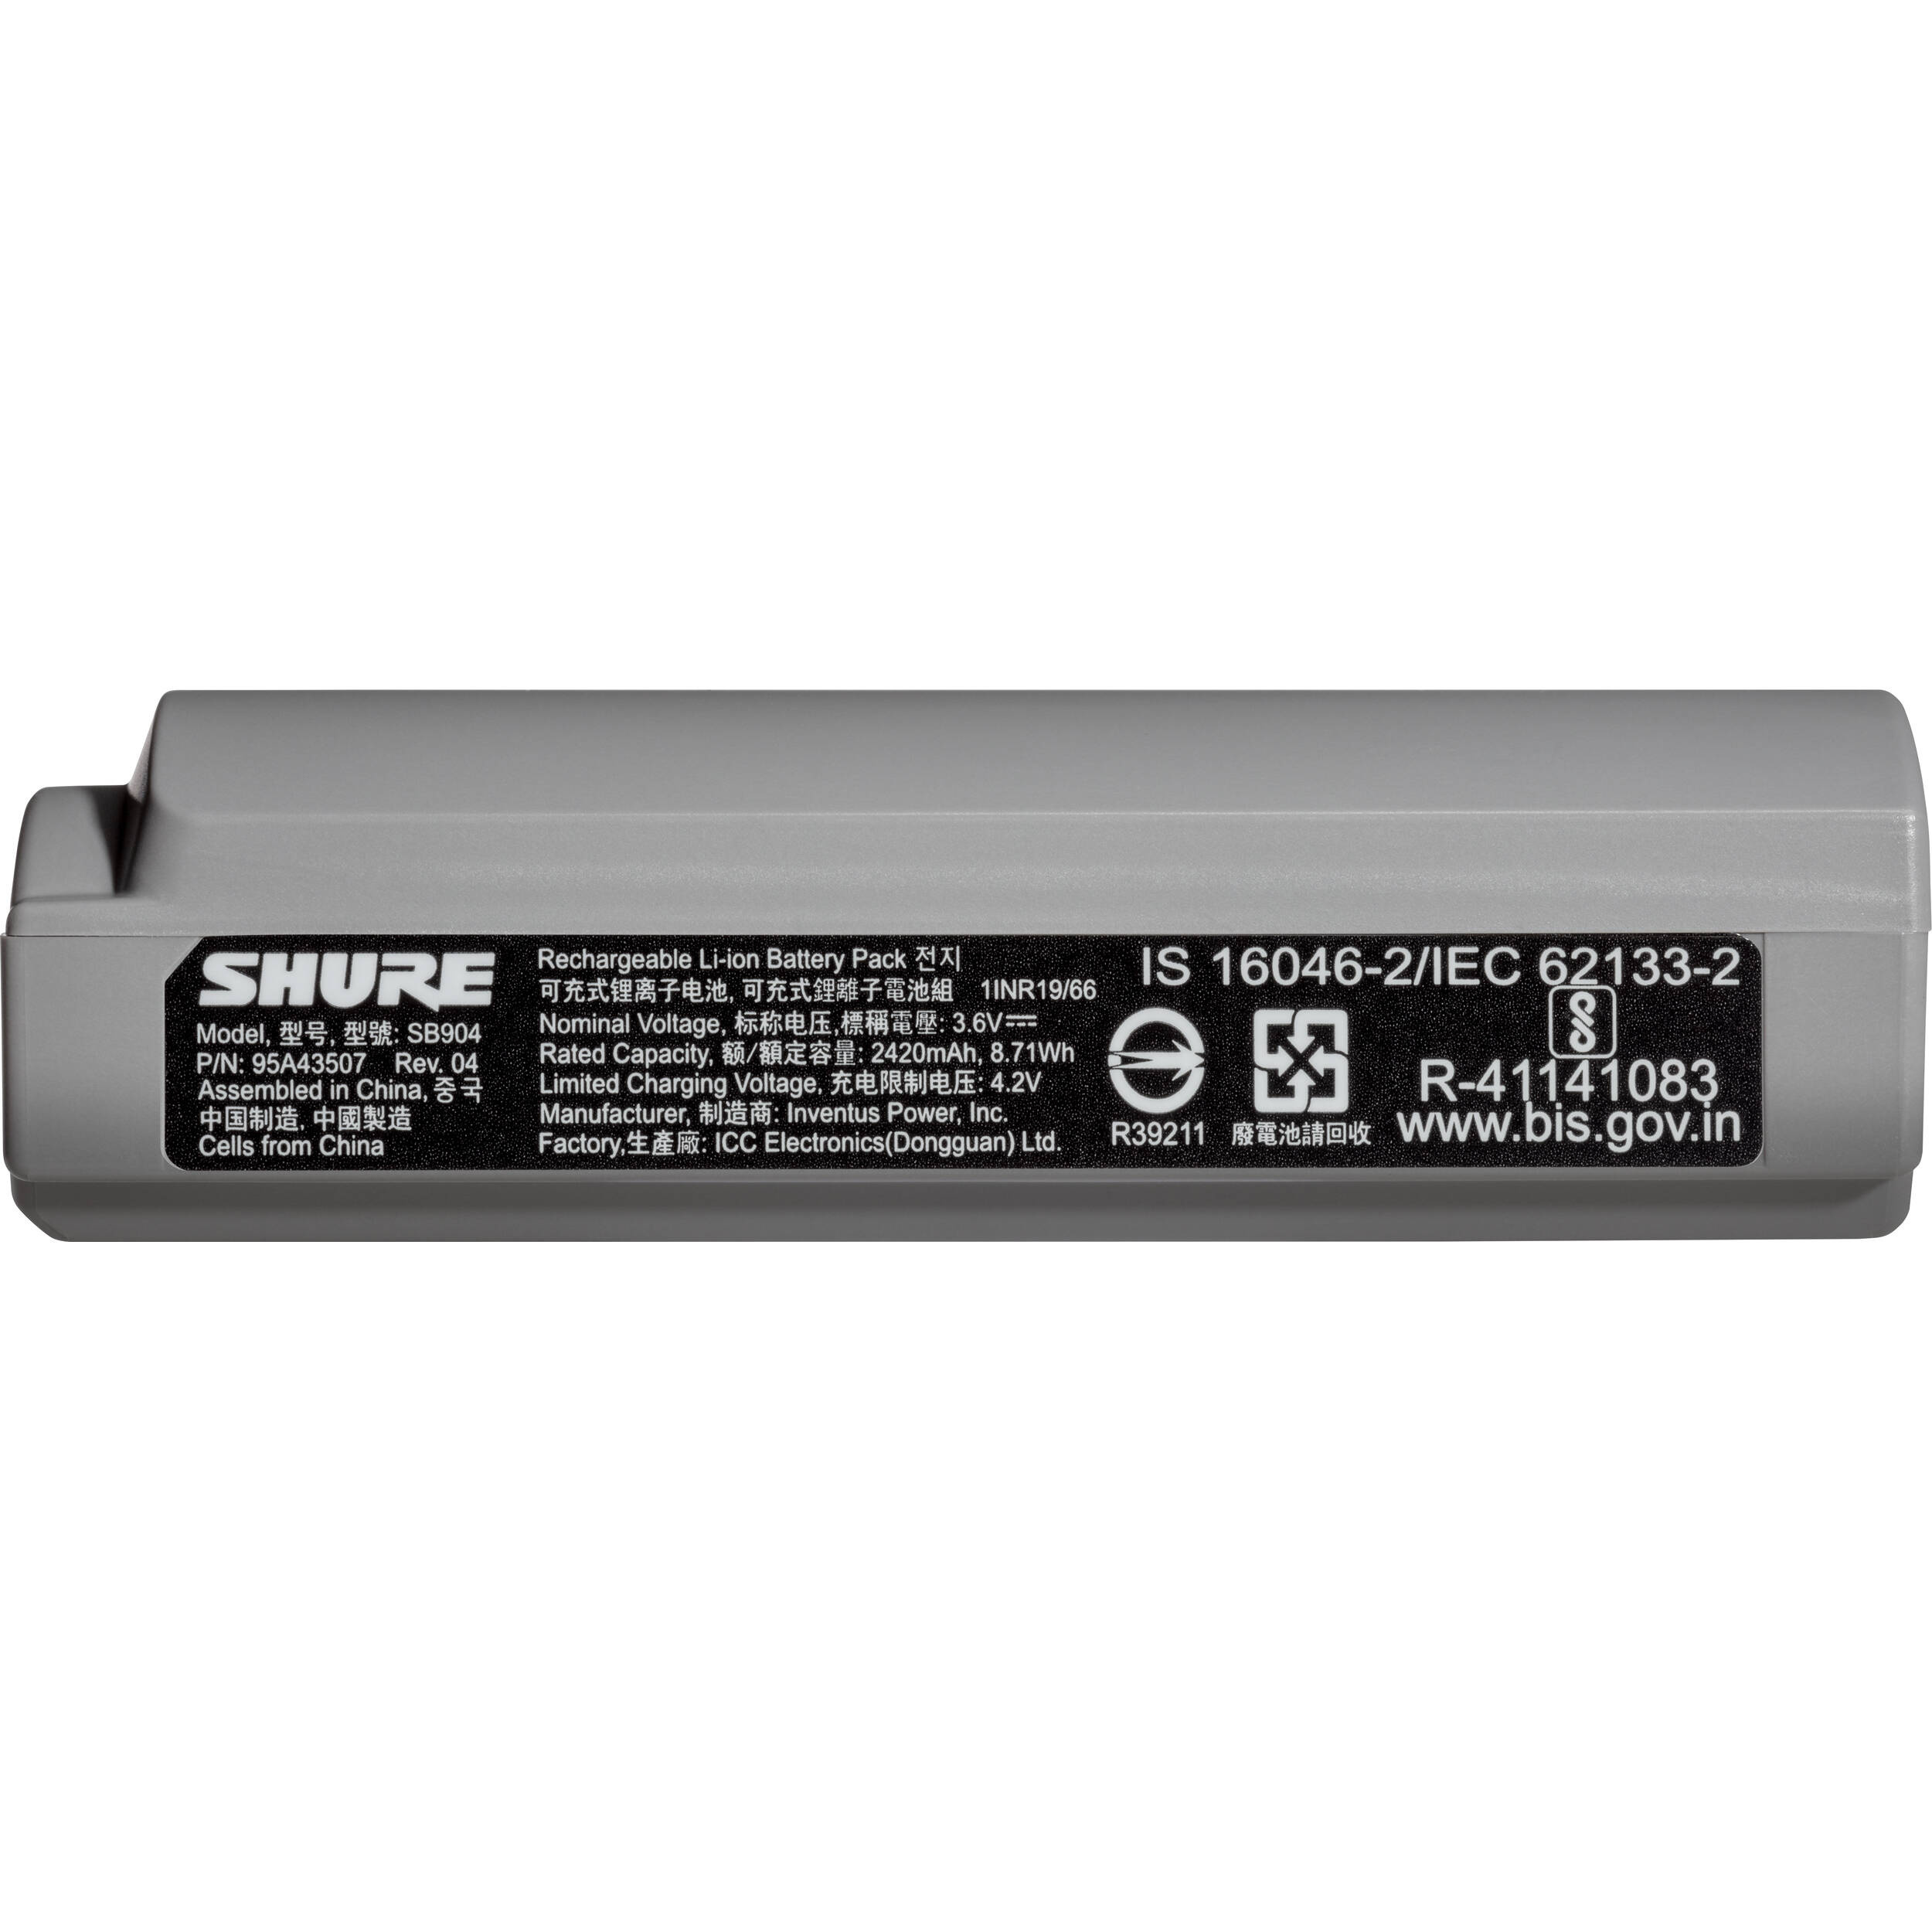 Shure SB904 Rechargeable Battery for GLX-D+ Wireless Transmitters